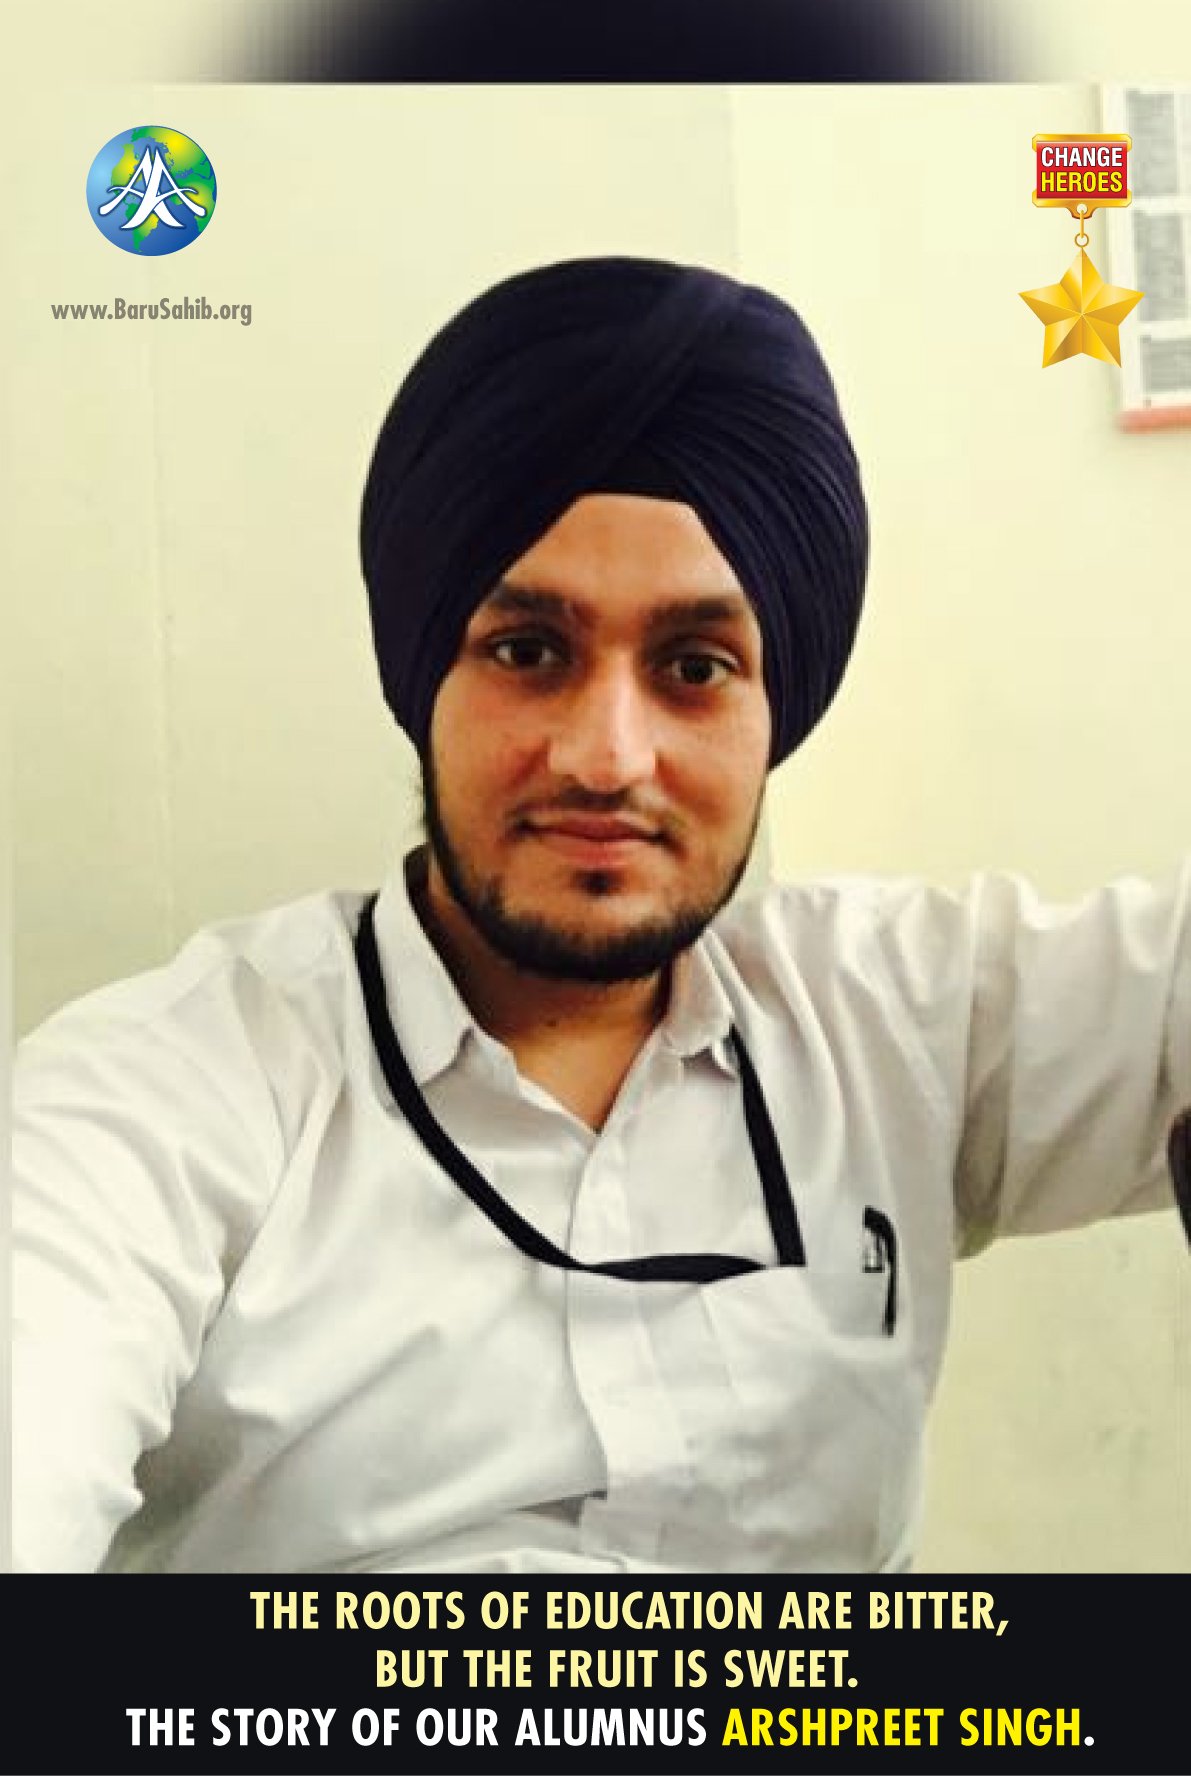 The-Roots-of-Education-are-Bitter-but-the-Fruit-is-Sweet.-The-story-of-our-alumnus-Arshpreet-Singh.